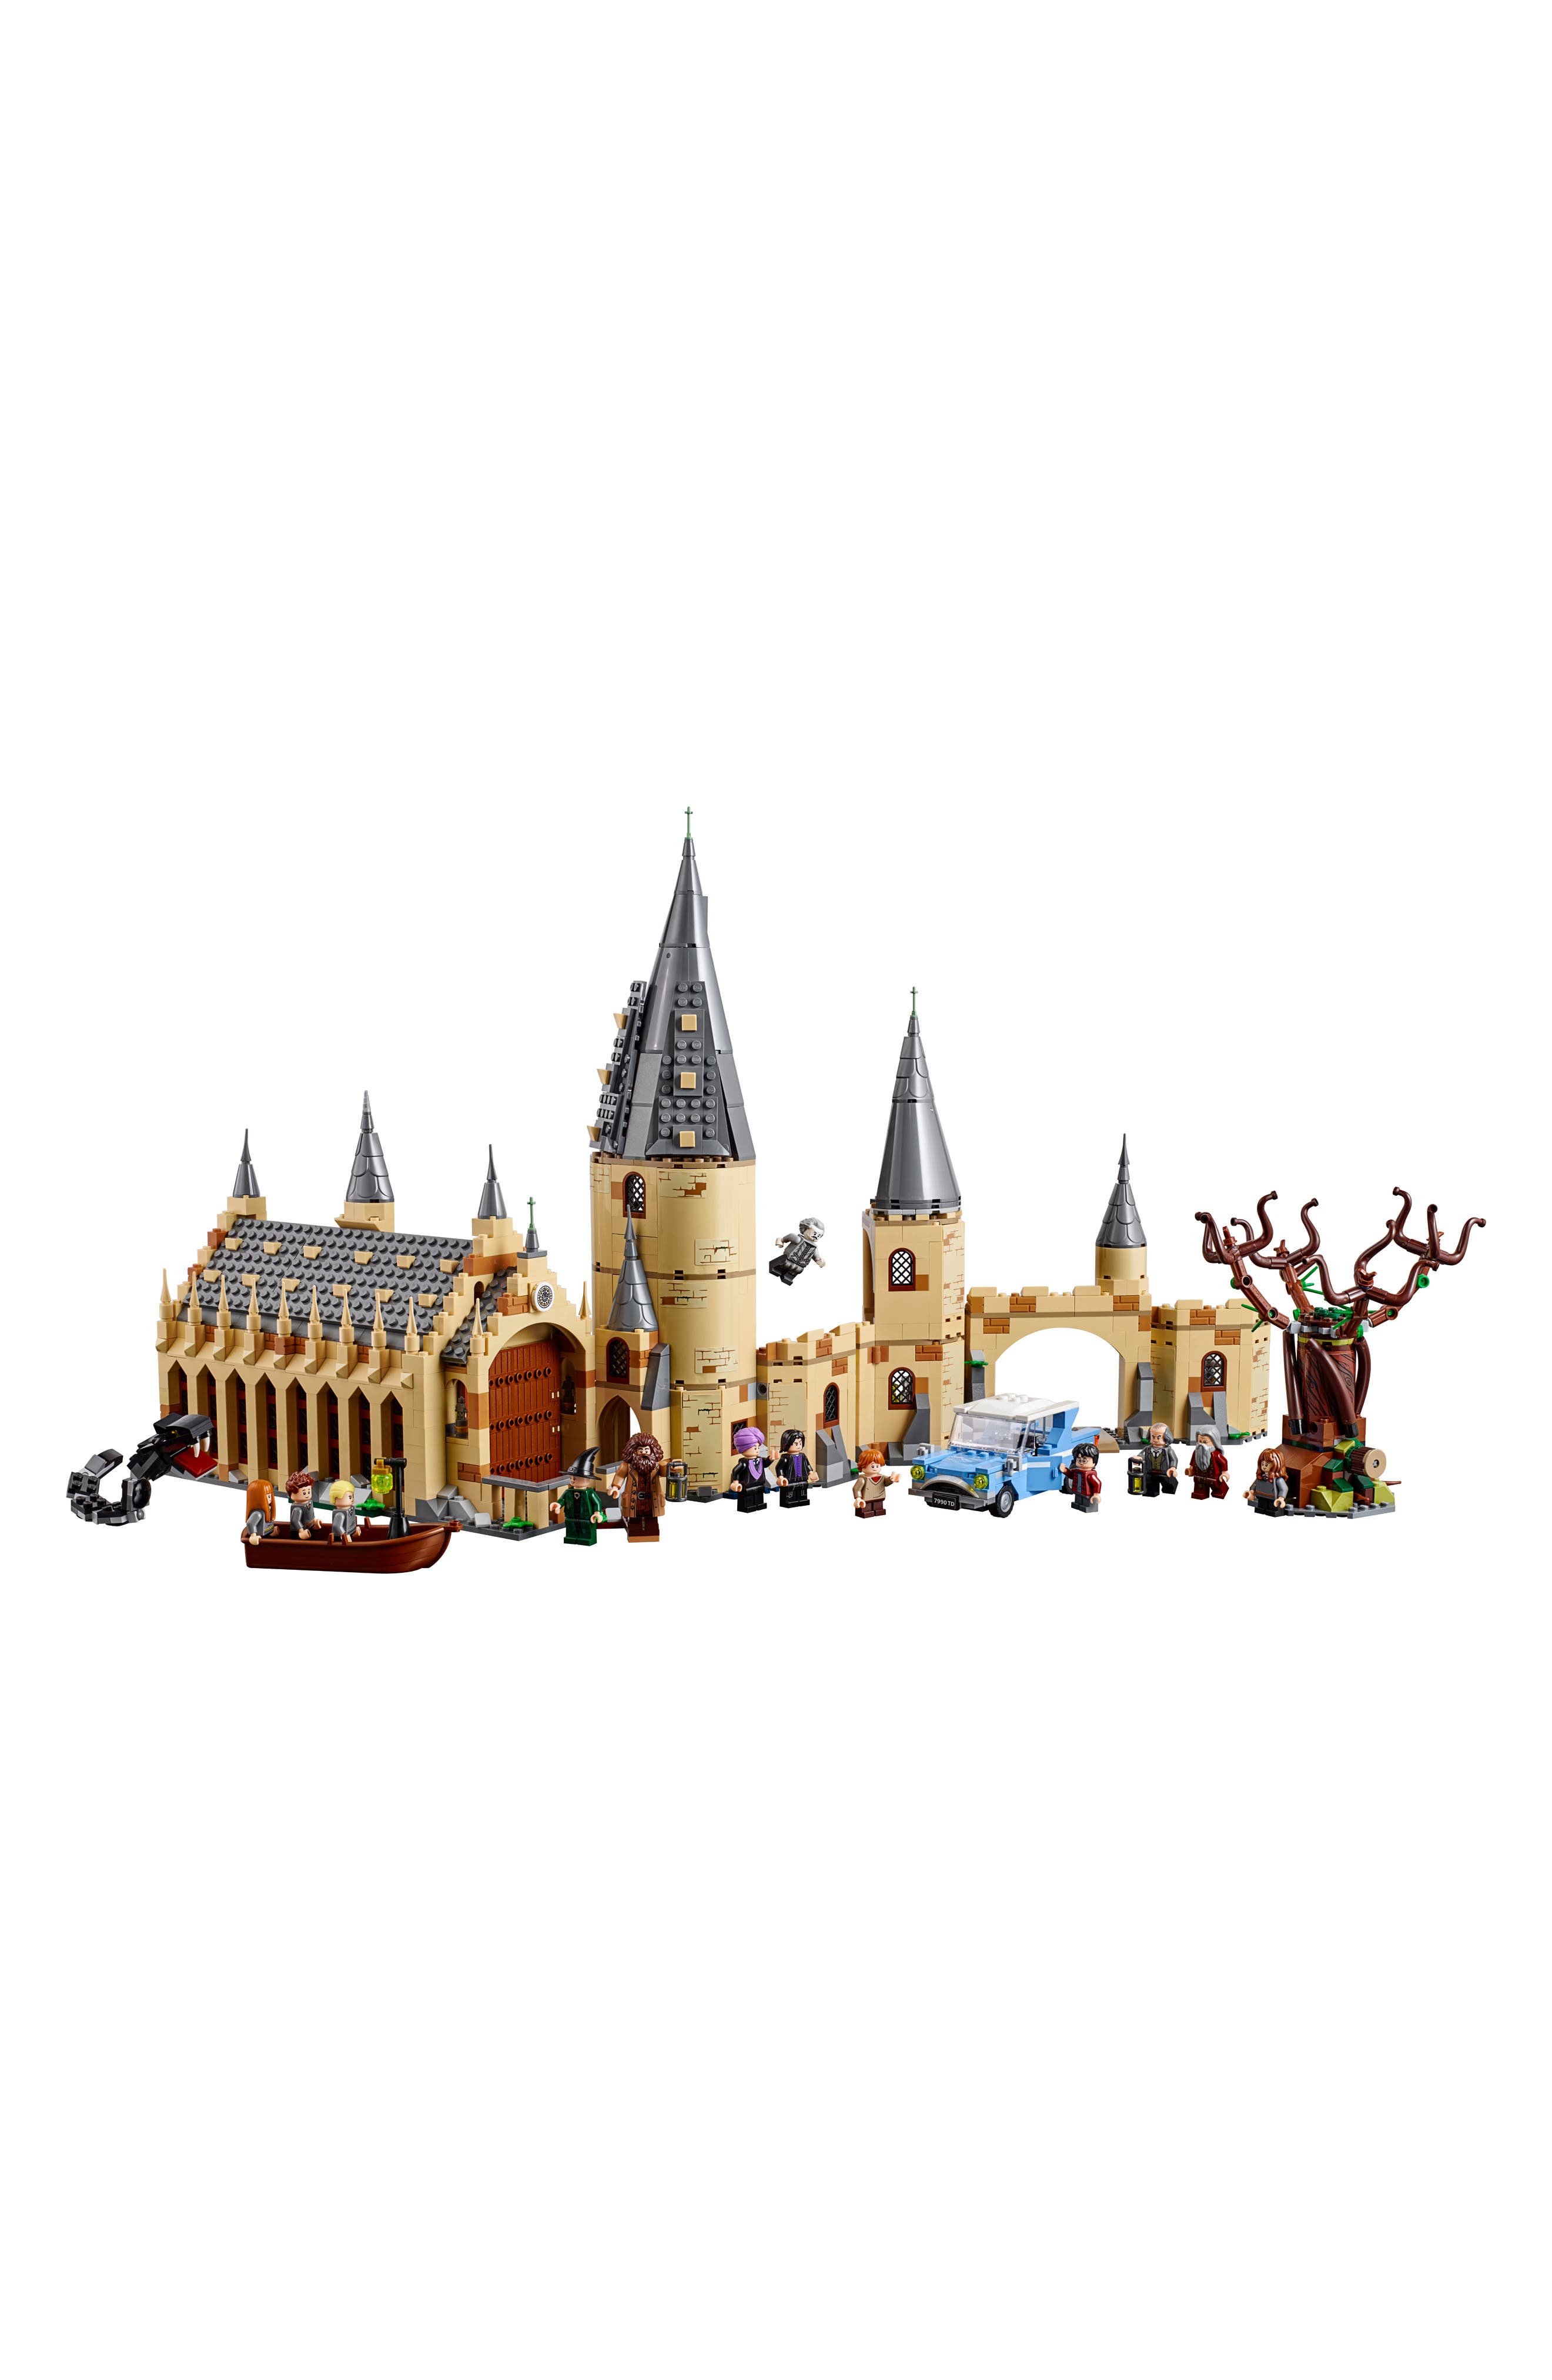 whomping willow lego best price